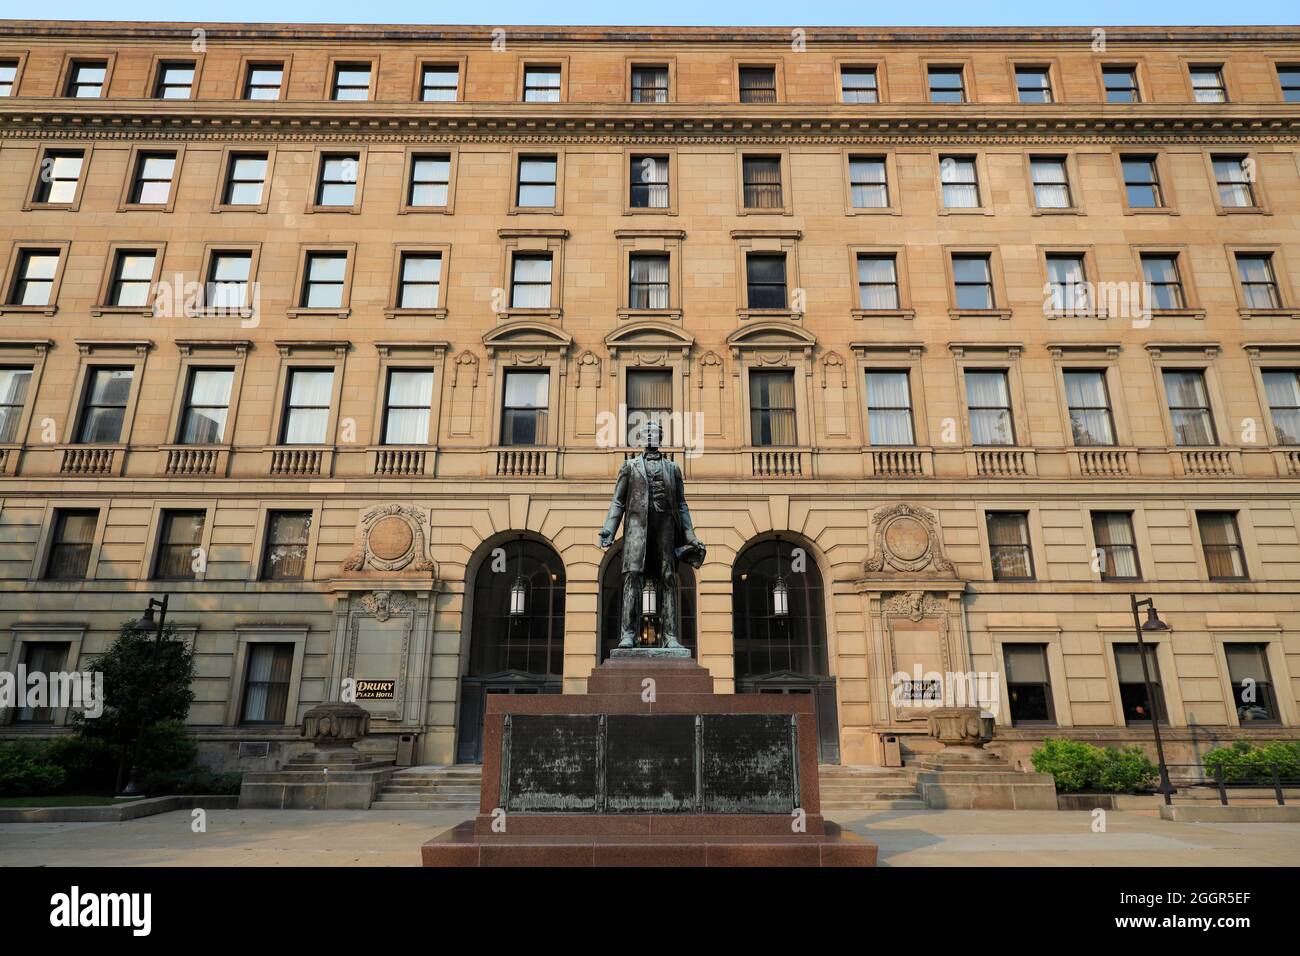 Drury Plaza Hotel the former Beaux-Arts style of Cleveland Metropolitan School District offices building with Abraham Lincoln statue in foreground.Downtown Cleveland.Ohio.USA Stock Photo